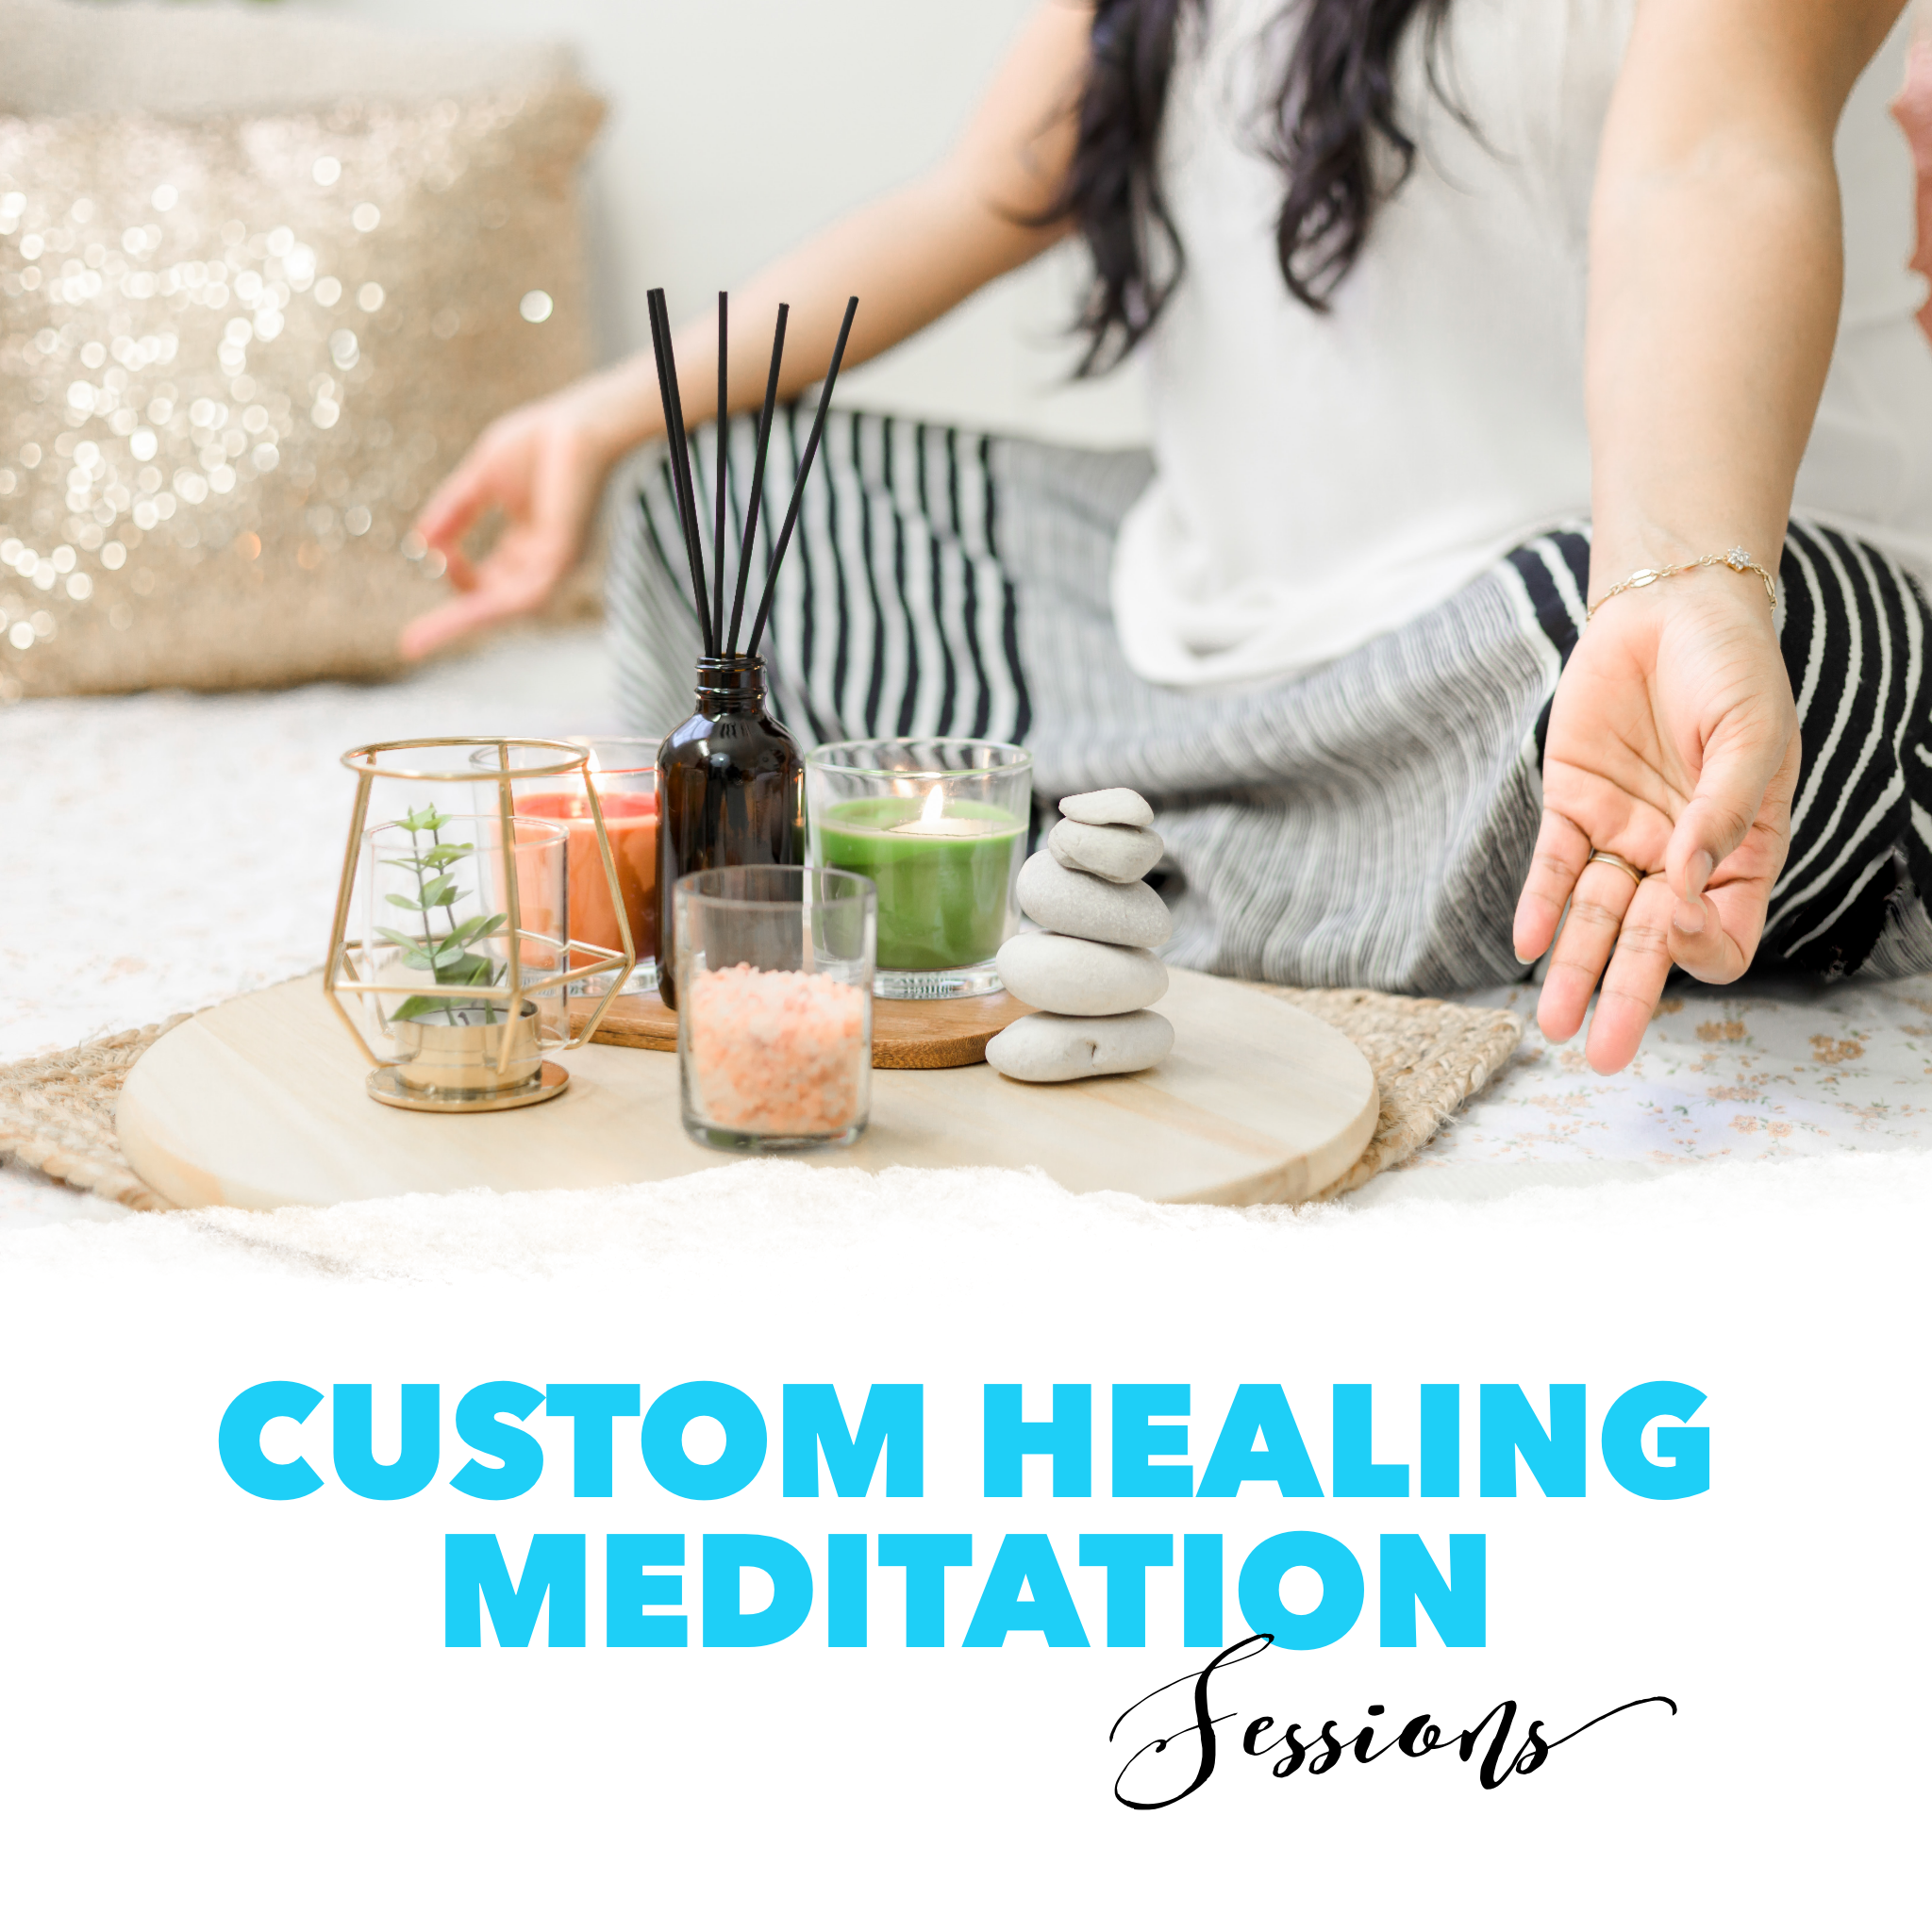 Guided Meditation For Healing - Starting In Your Mind